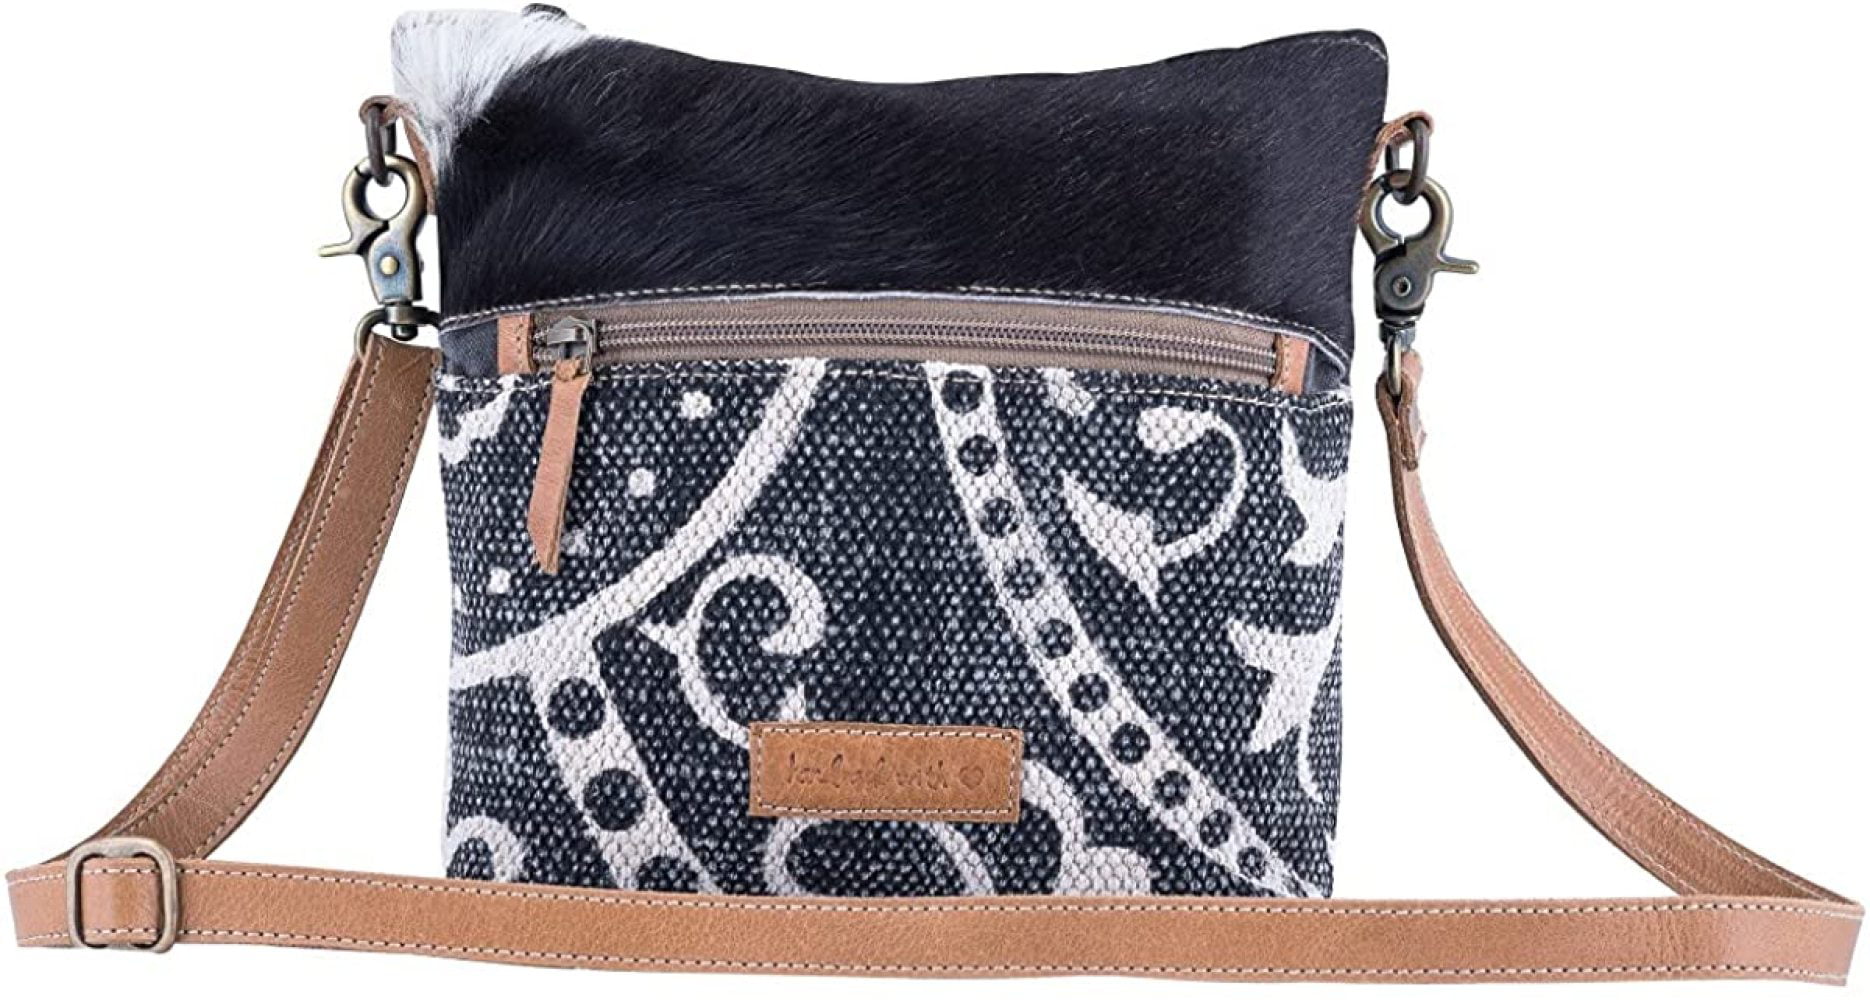 The Pocket Star Upcycled Canvas and Genuine Leather Crossbody Bag 